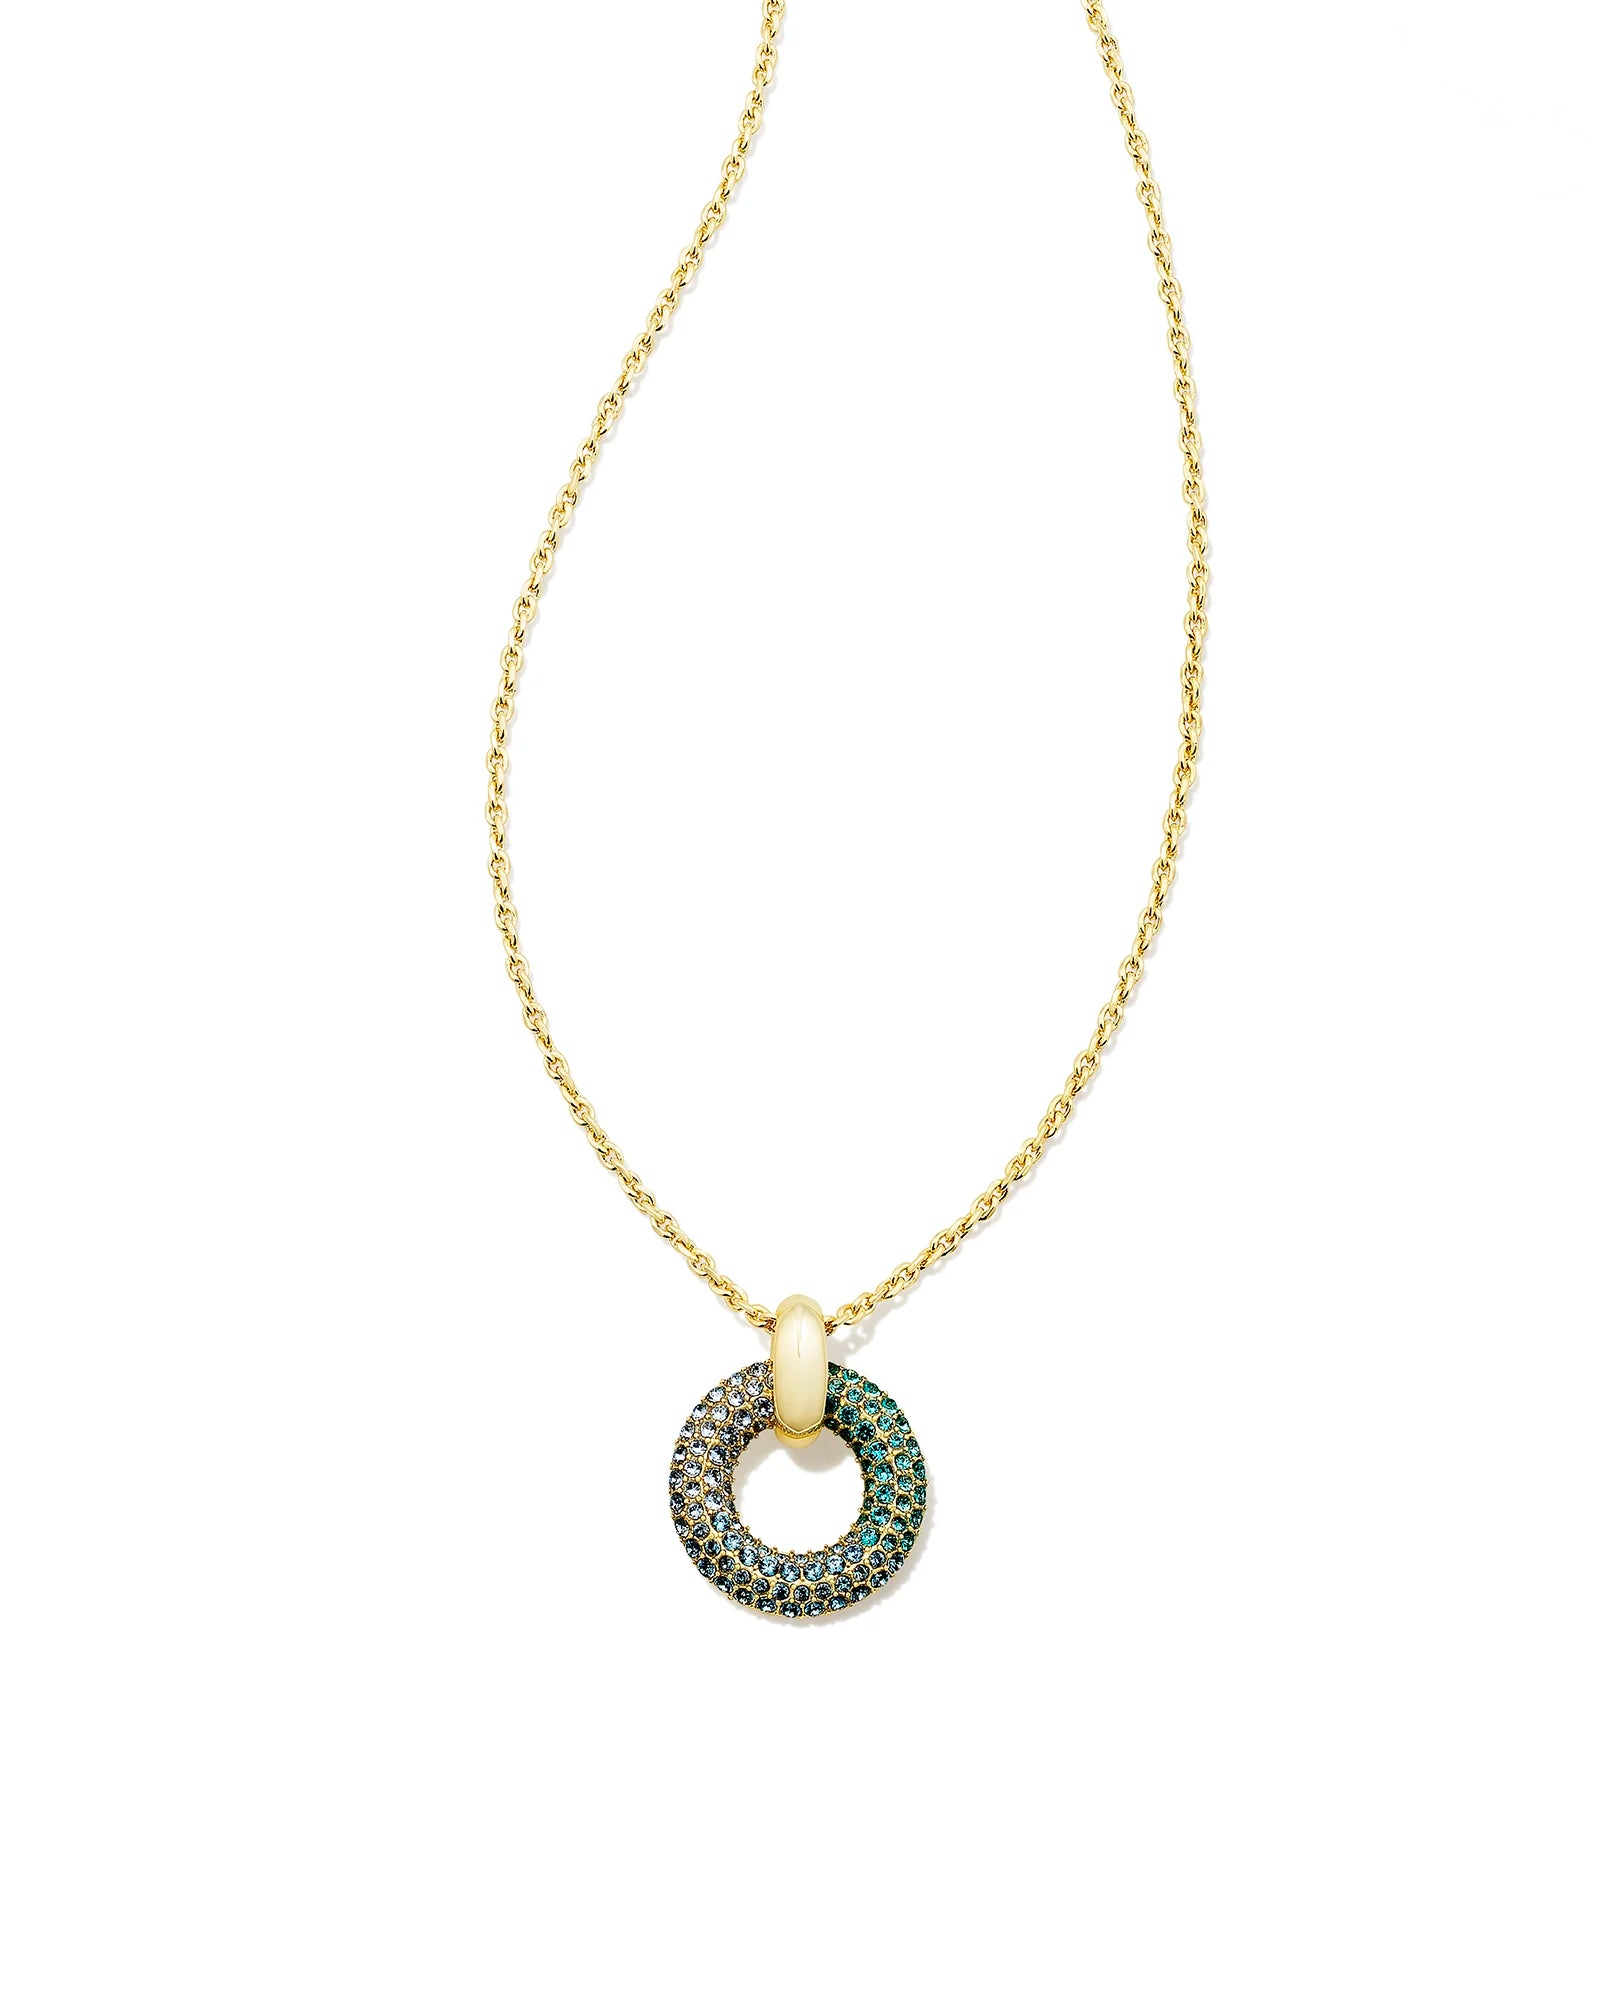 Kendra Scott Mikki Pave Short Pendant Necklace Gold Green Blue Ombre Mix-Necklaces-Kendra Scott-N00337GLD-The Twisted Chandelier